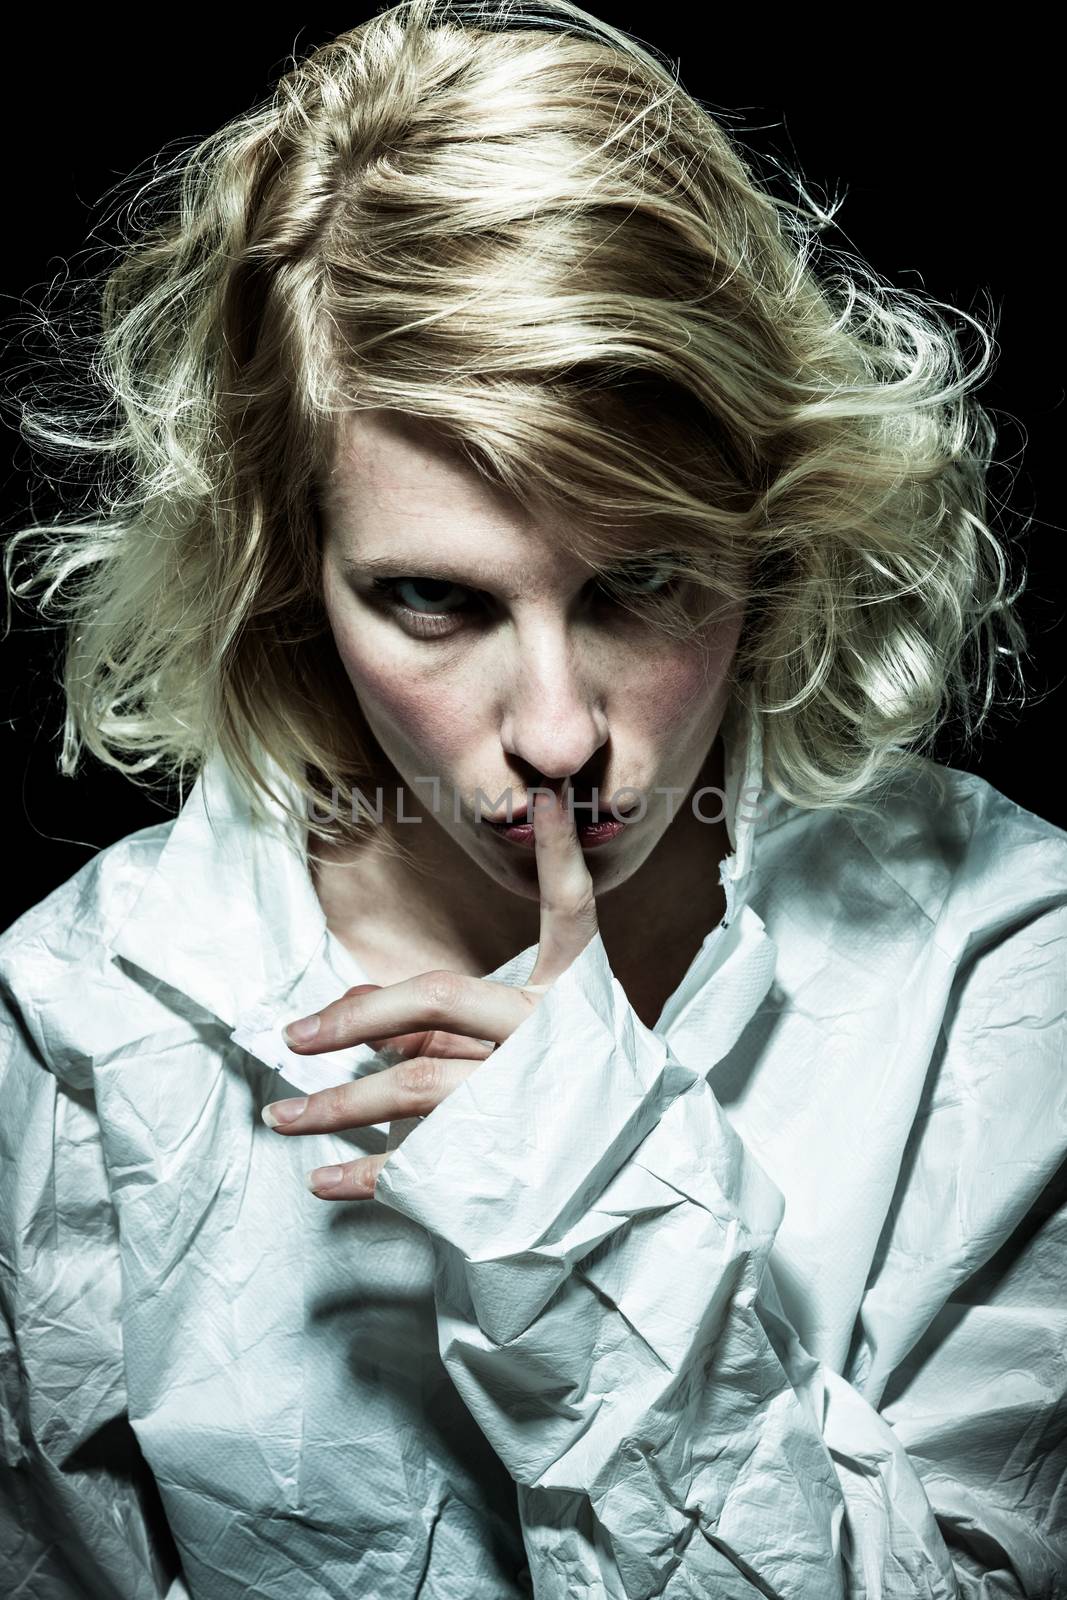 Psycho Woman asking for Silence with Finger on Lips